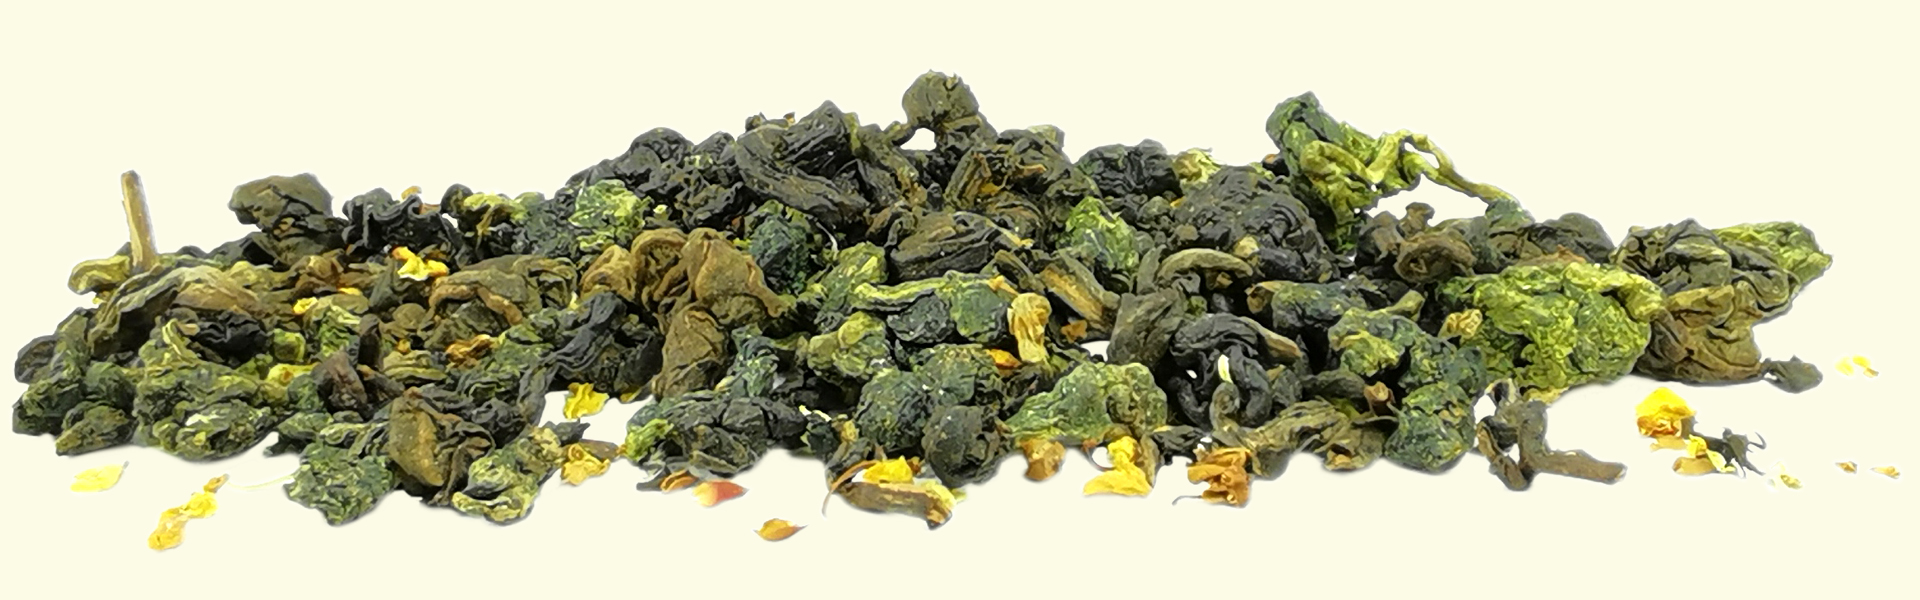 Oolong tea # 12 Osmanthus flower : a blend of Oolong # 12 Jinxuan tea in rolled leaves, with Osmanthus flowers.